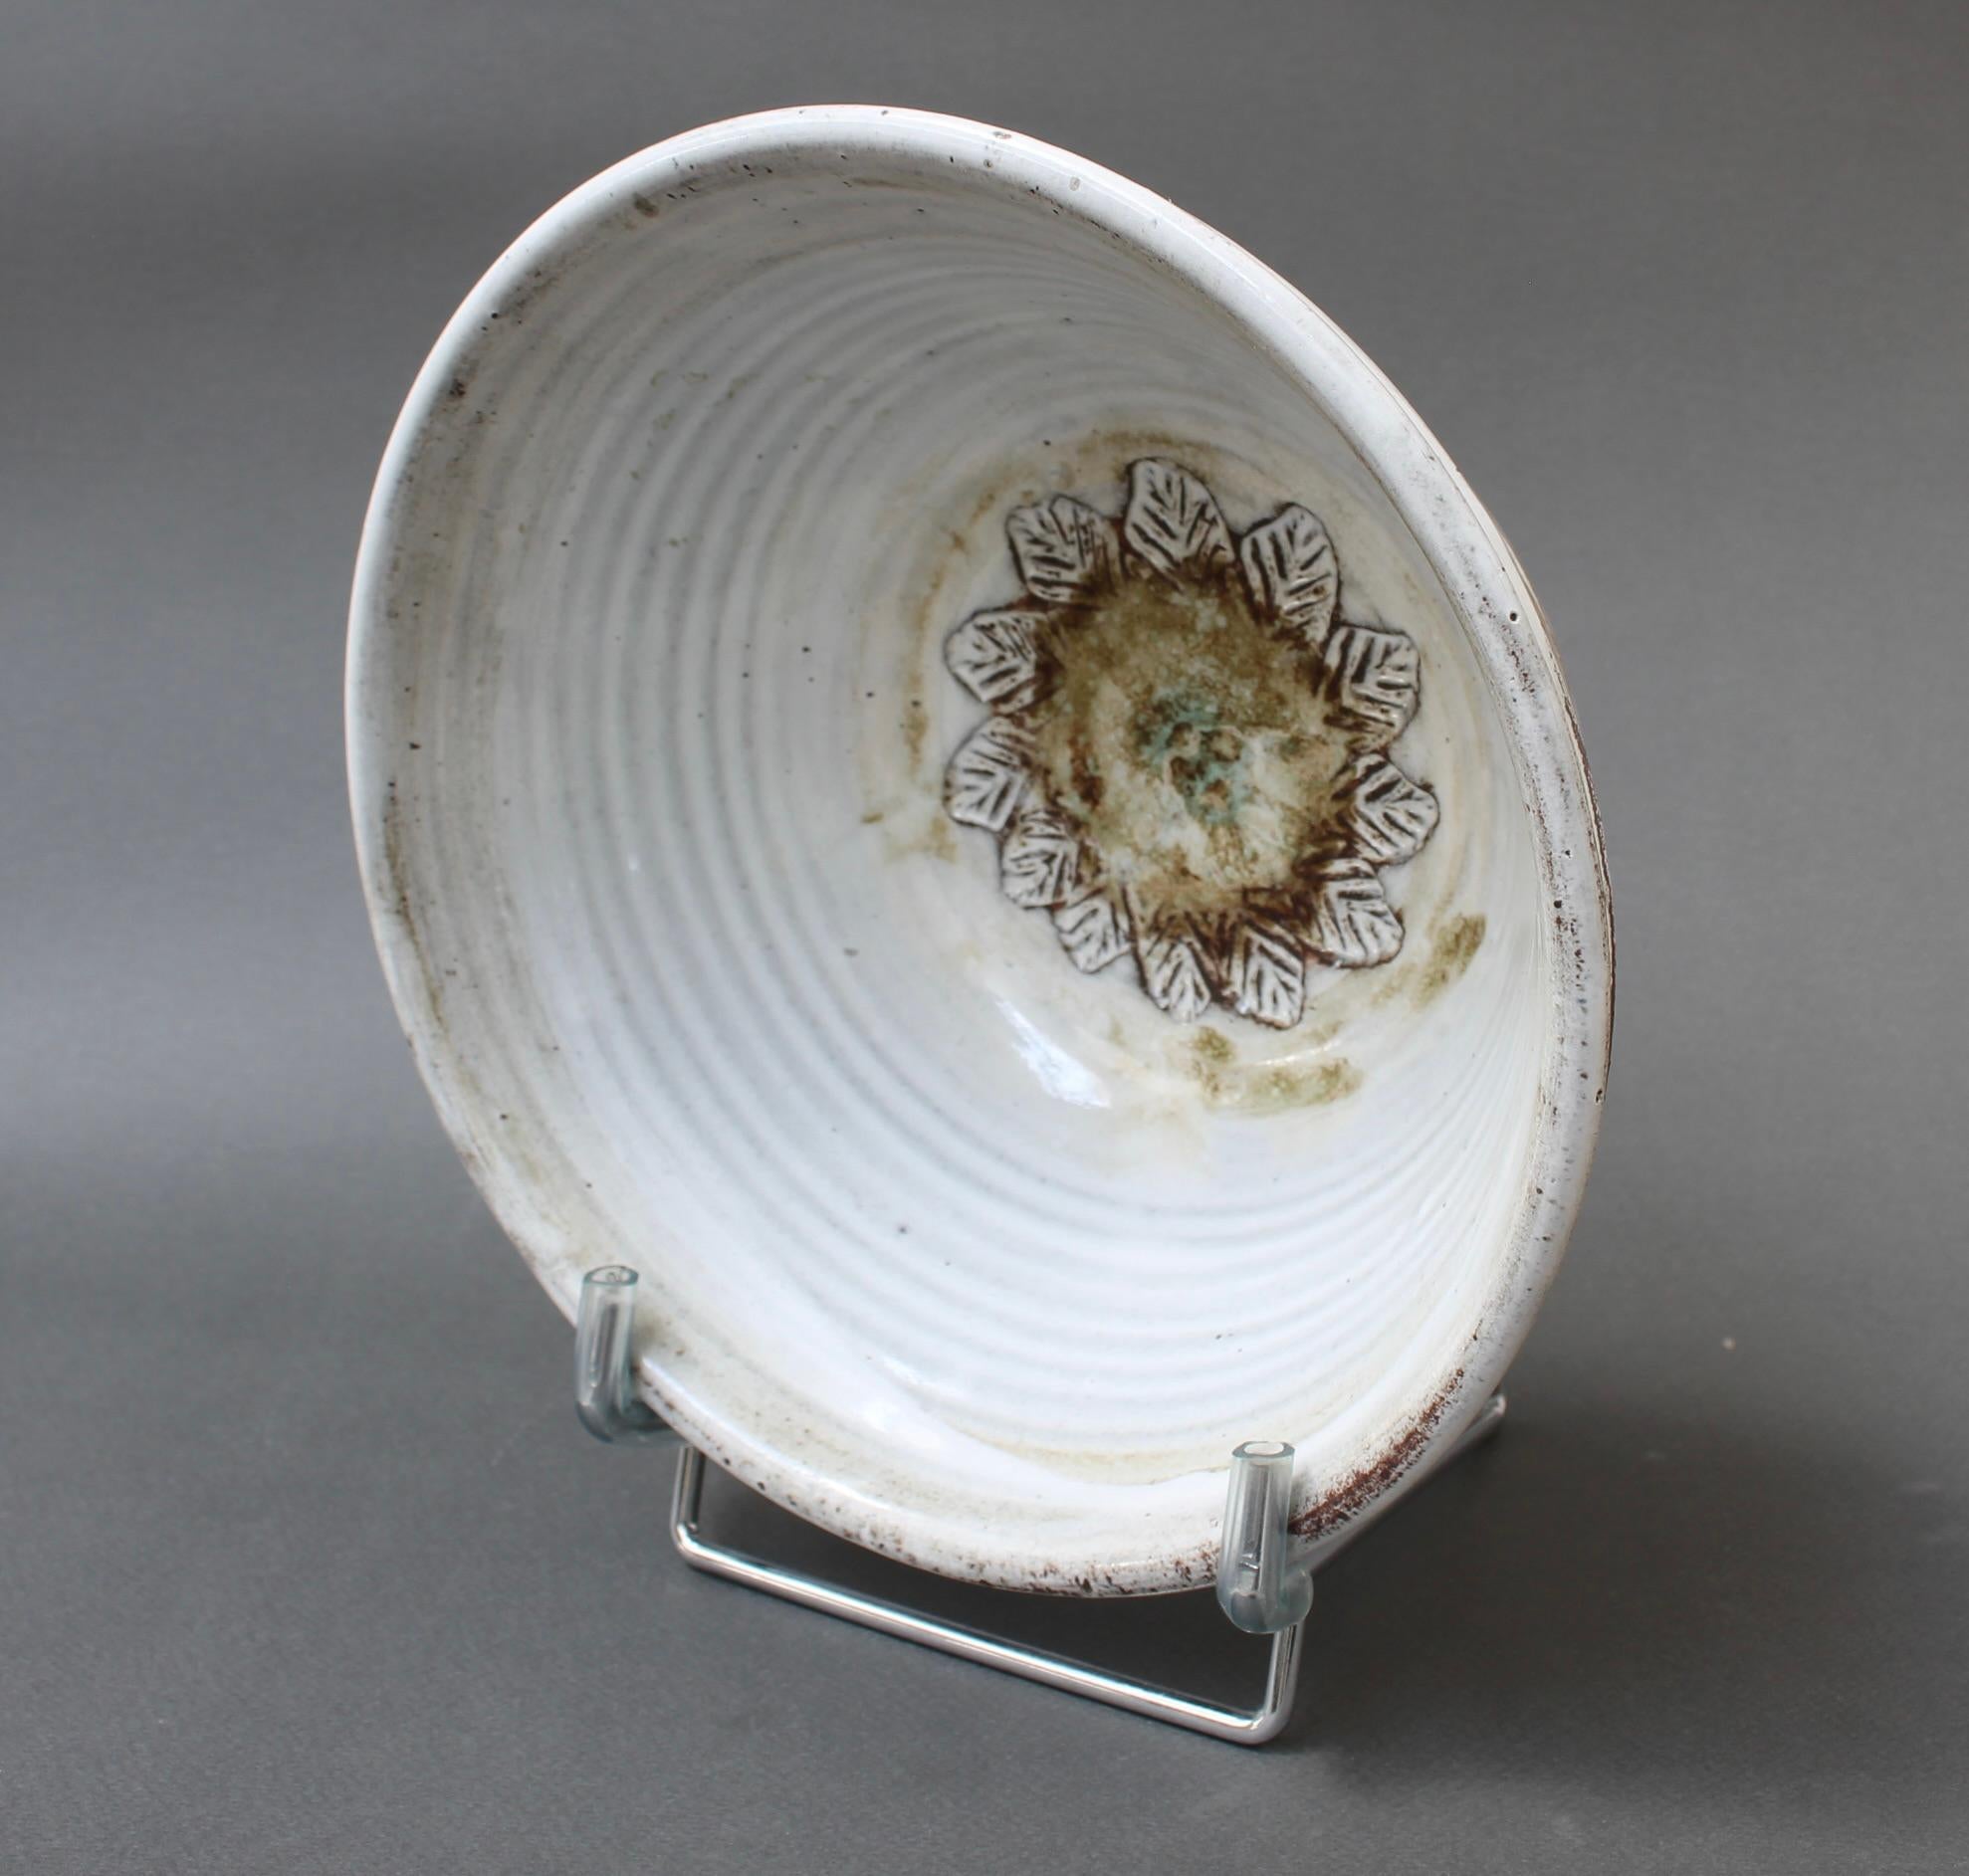 Mid-century French decorative ceramic bowl (circa 1960s) by Albert Thiry. Chalky-white glazed interior sides prepare the viewer for the delightful base which consists of a round of brown and green encircled by an incised leaf motif with a sunflower